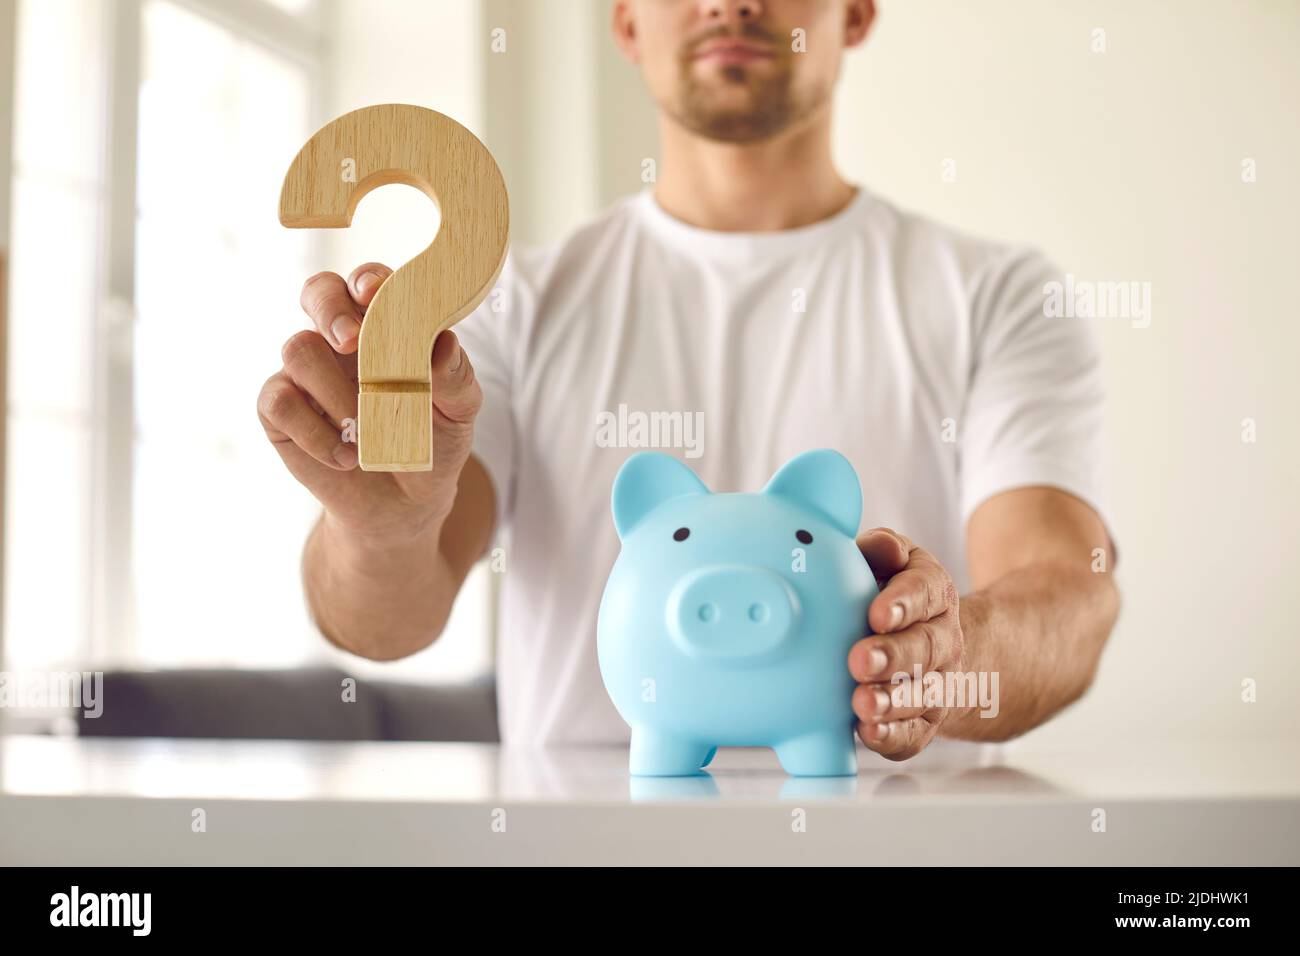 Man who is thinking about what currency to keep money holds question mark near piggy bank. Stock Photo